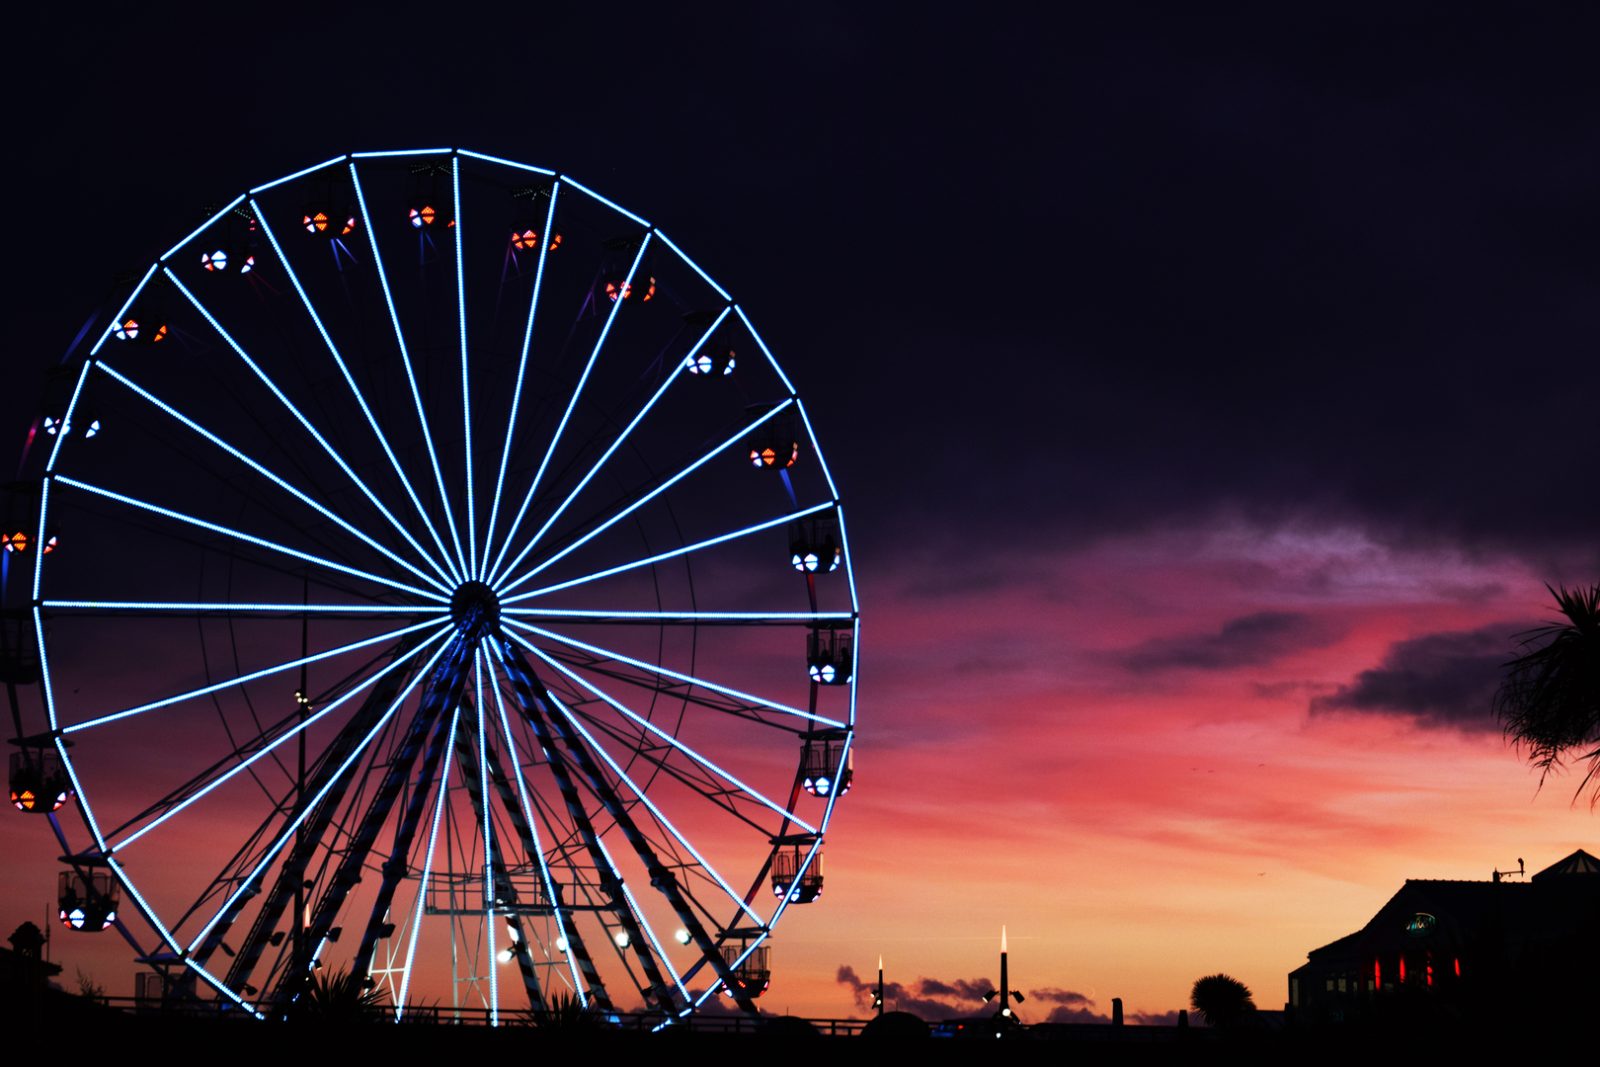 night-recreation-ferris-wheel-tourist-attraction-outdoor-recreation-geographical-feature-1389135-pxhere.com